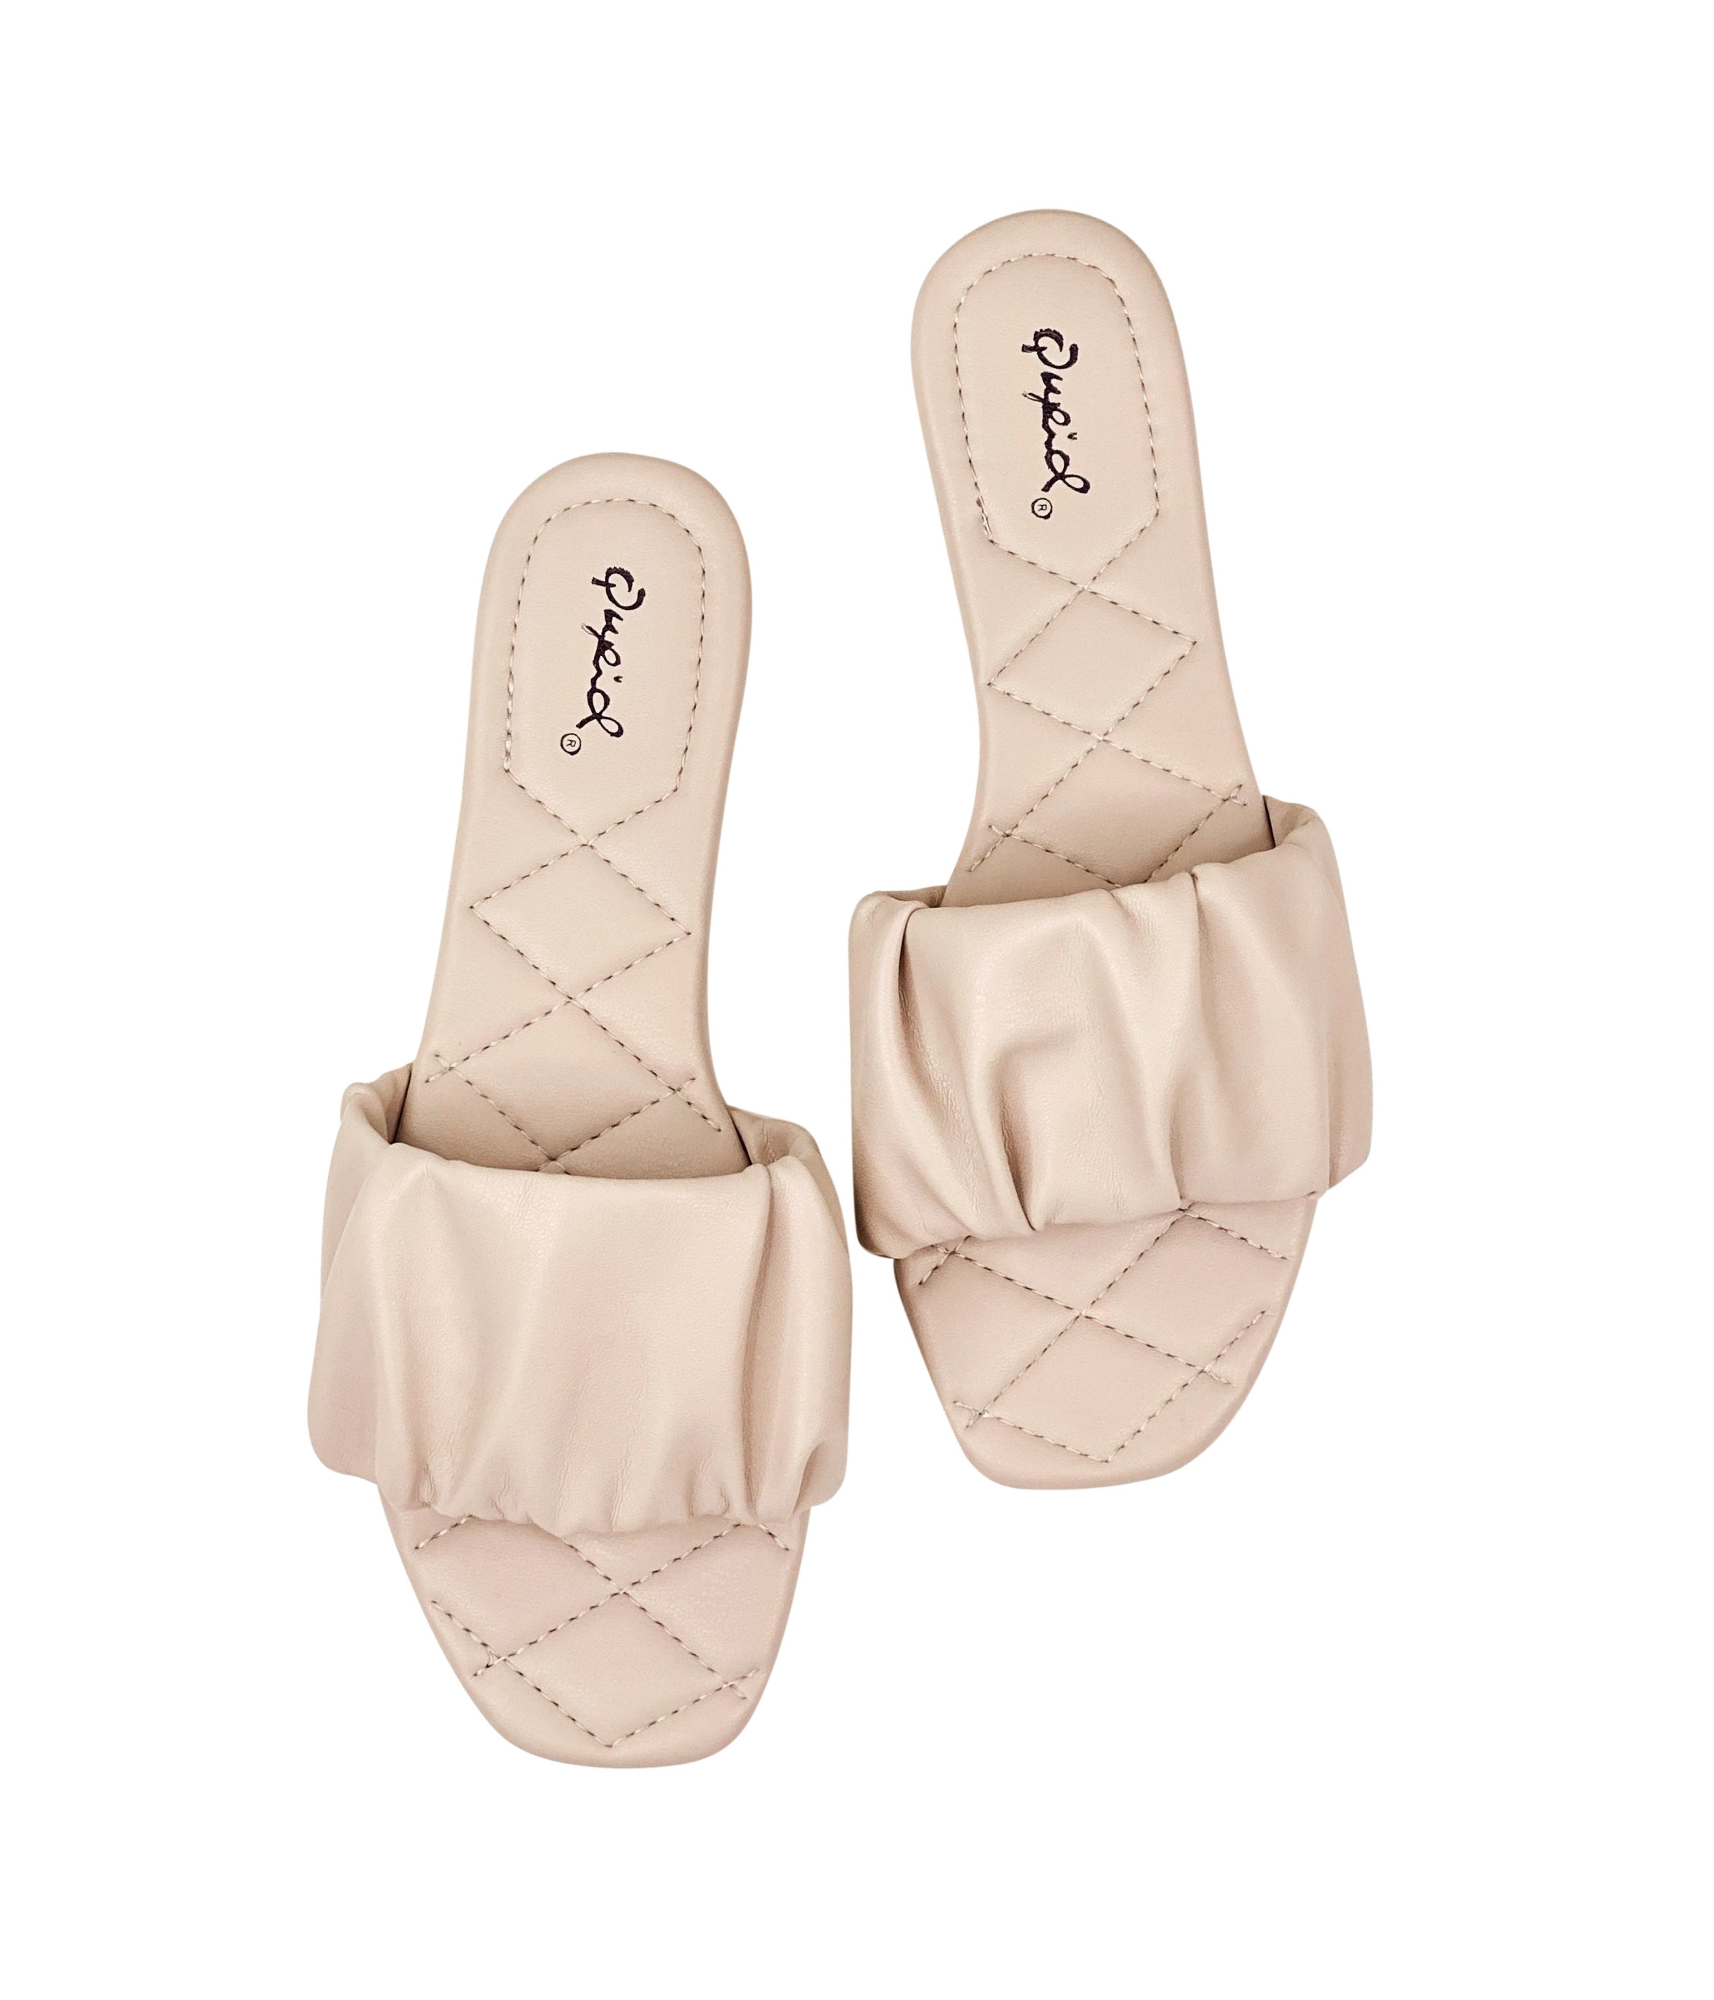 Hazy Rouched Sandal in Warm Taupe - Rural Haze